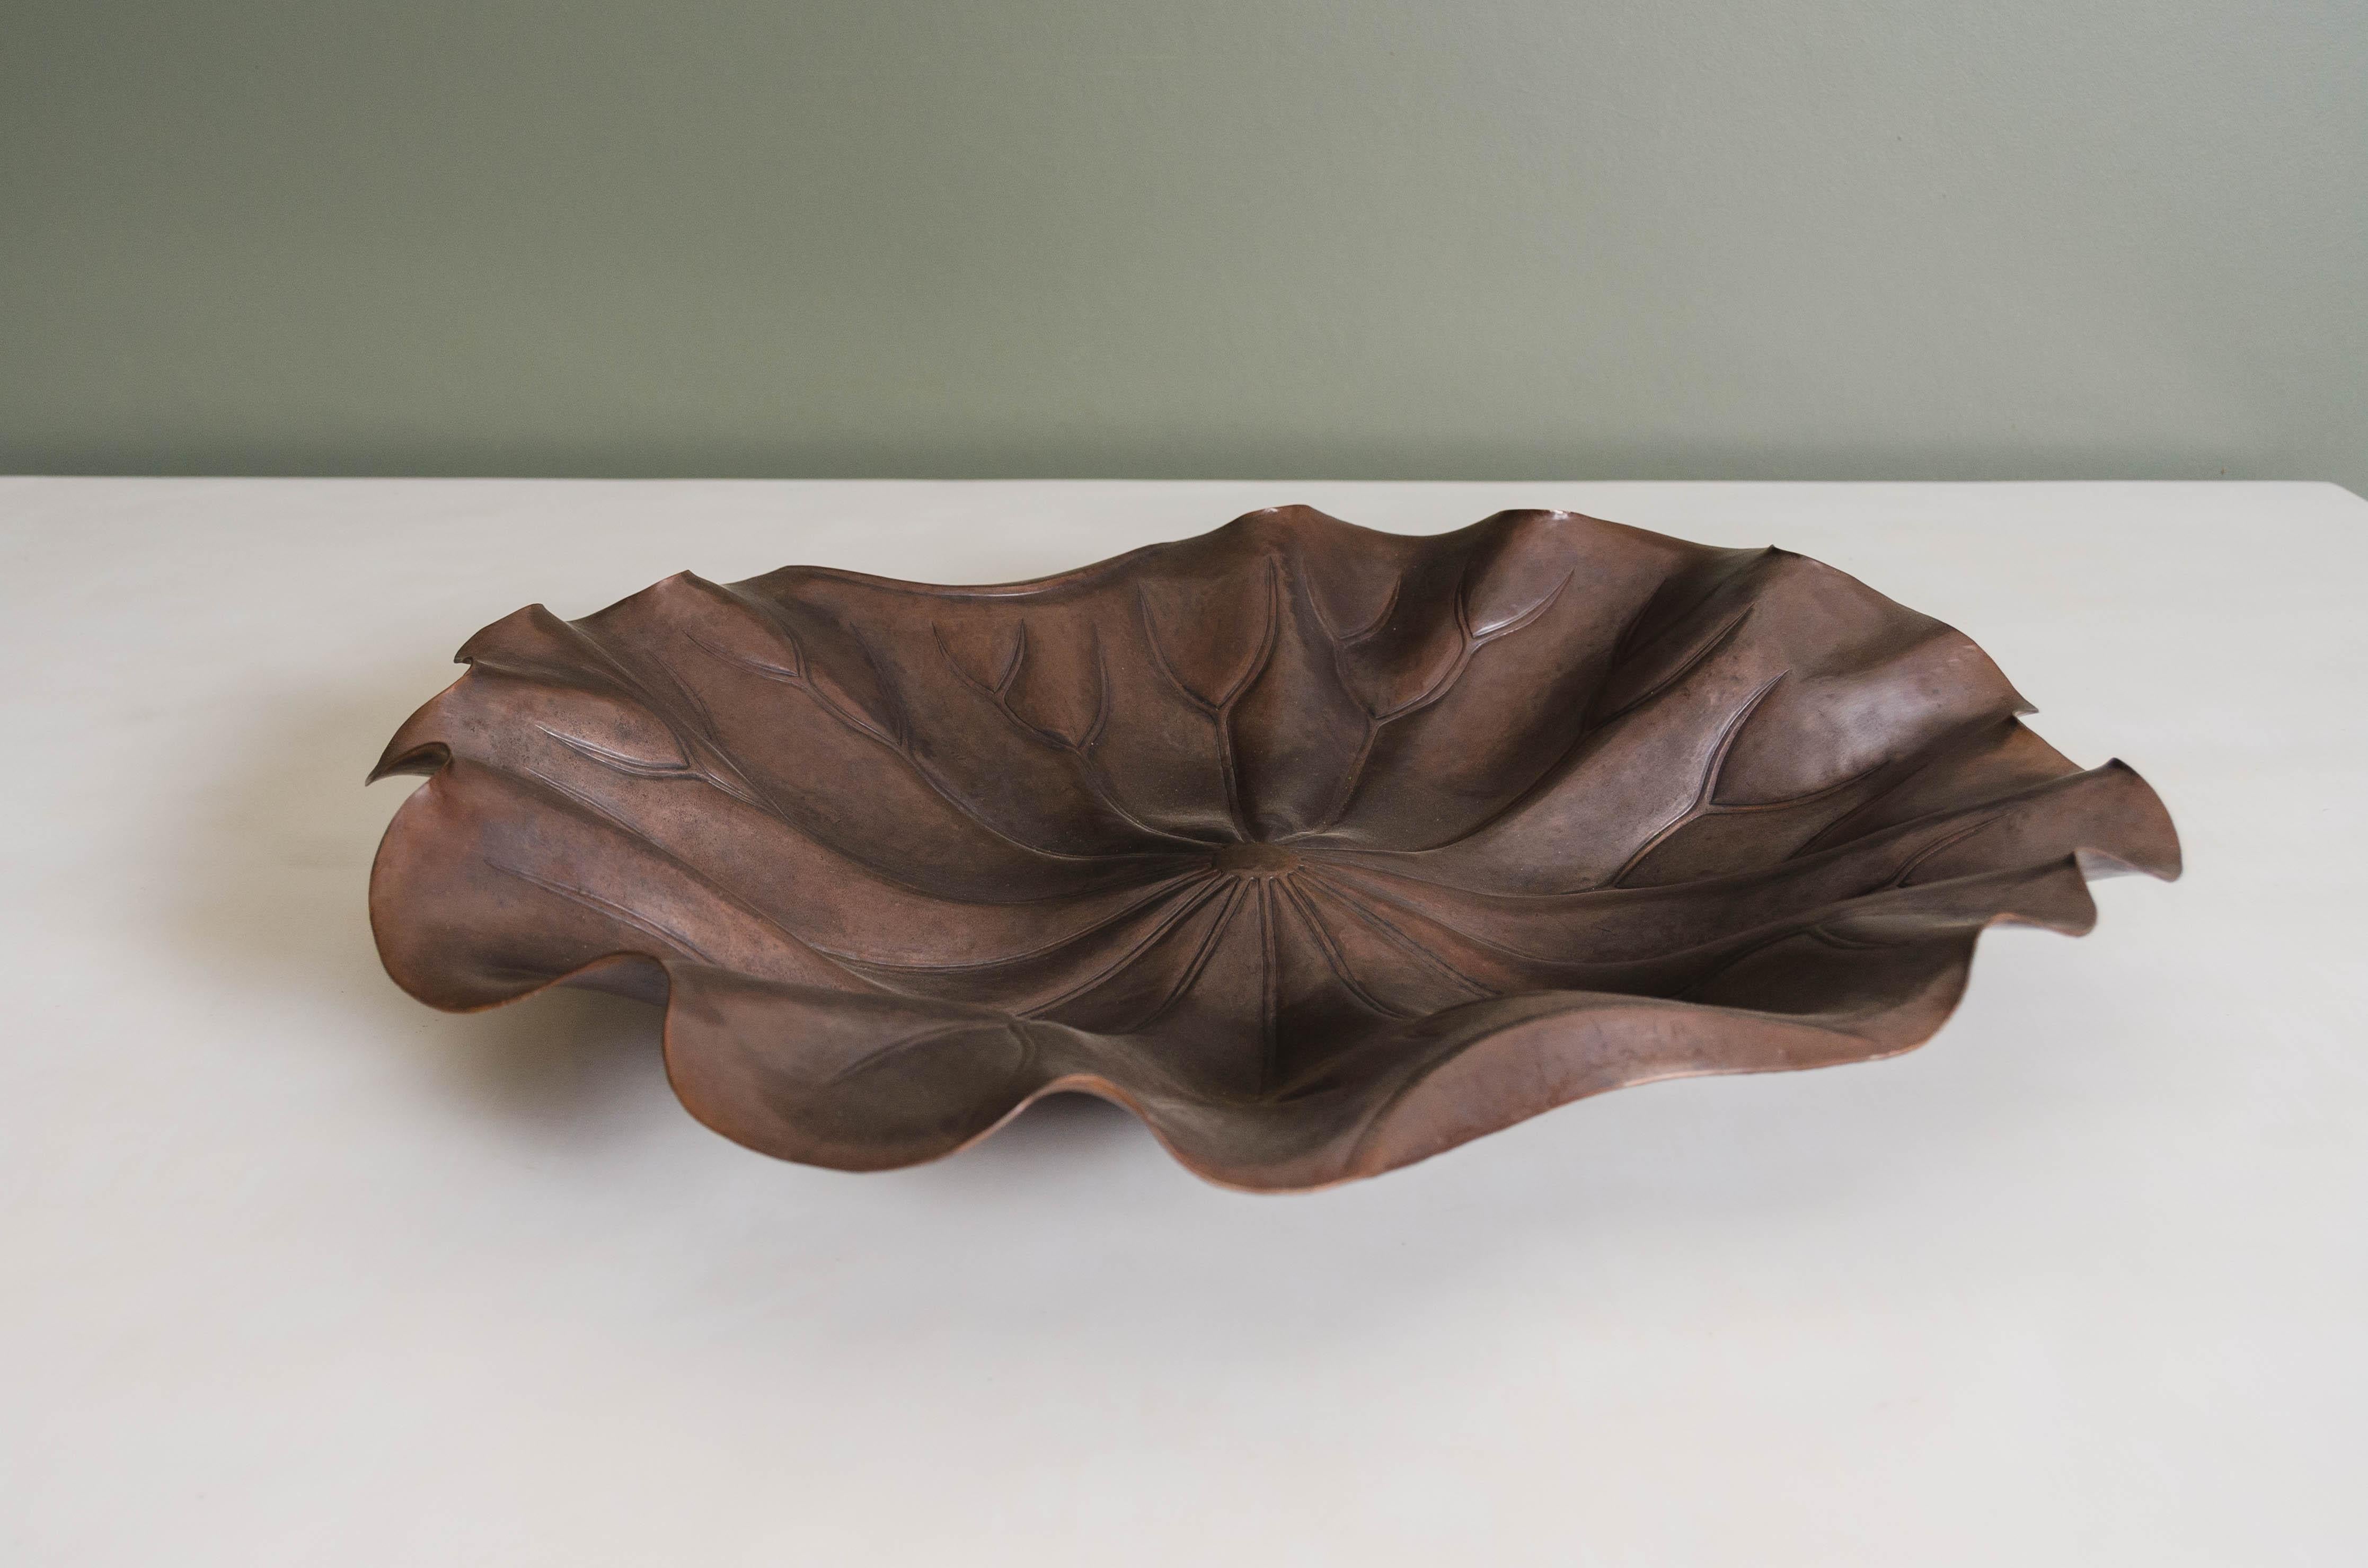 Lotus leaf plate
Antique copper
Hand Repoussé
Limited edition
Contemporary
Each piece is individually crafted and is unique.
Repoussé is the traditional art of hand-hammering decorative relief onto sheet metal. The technique originated circa